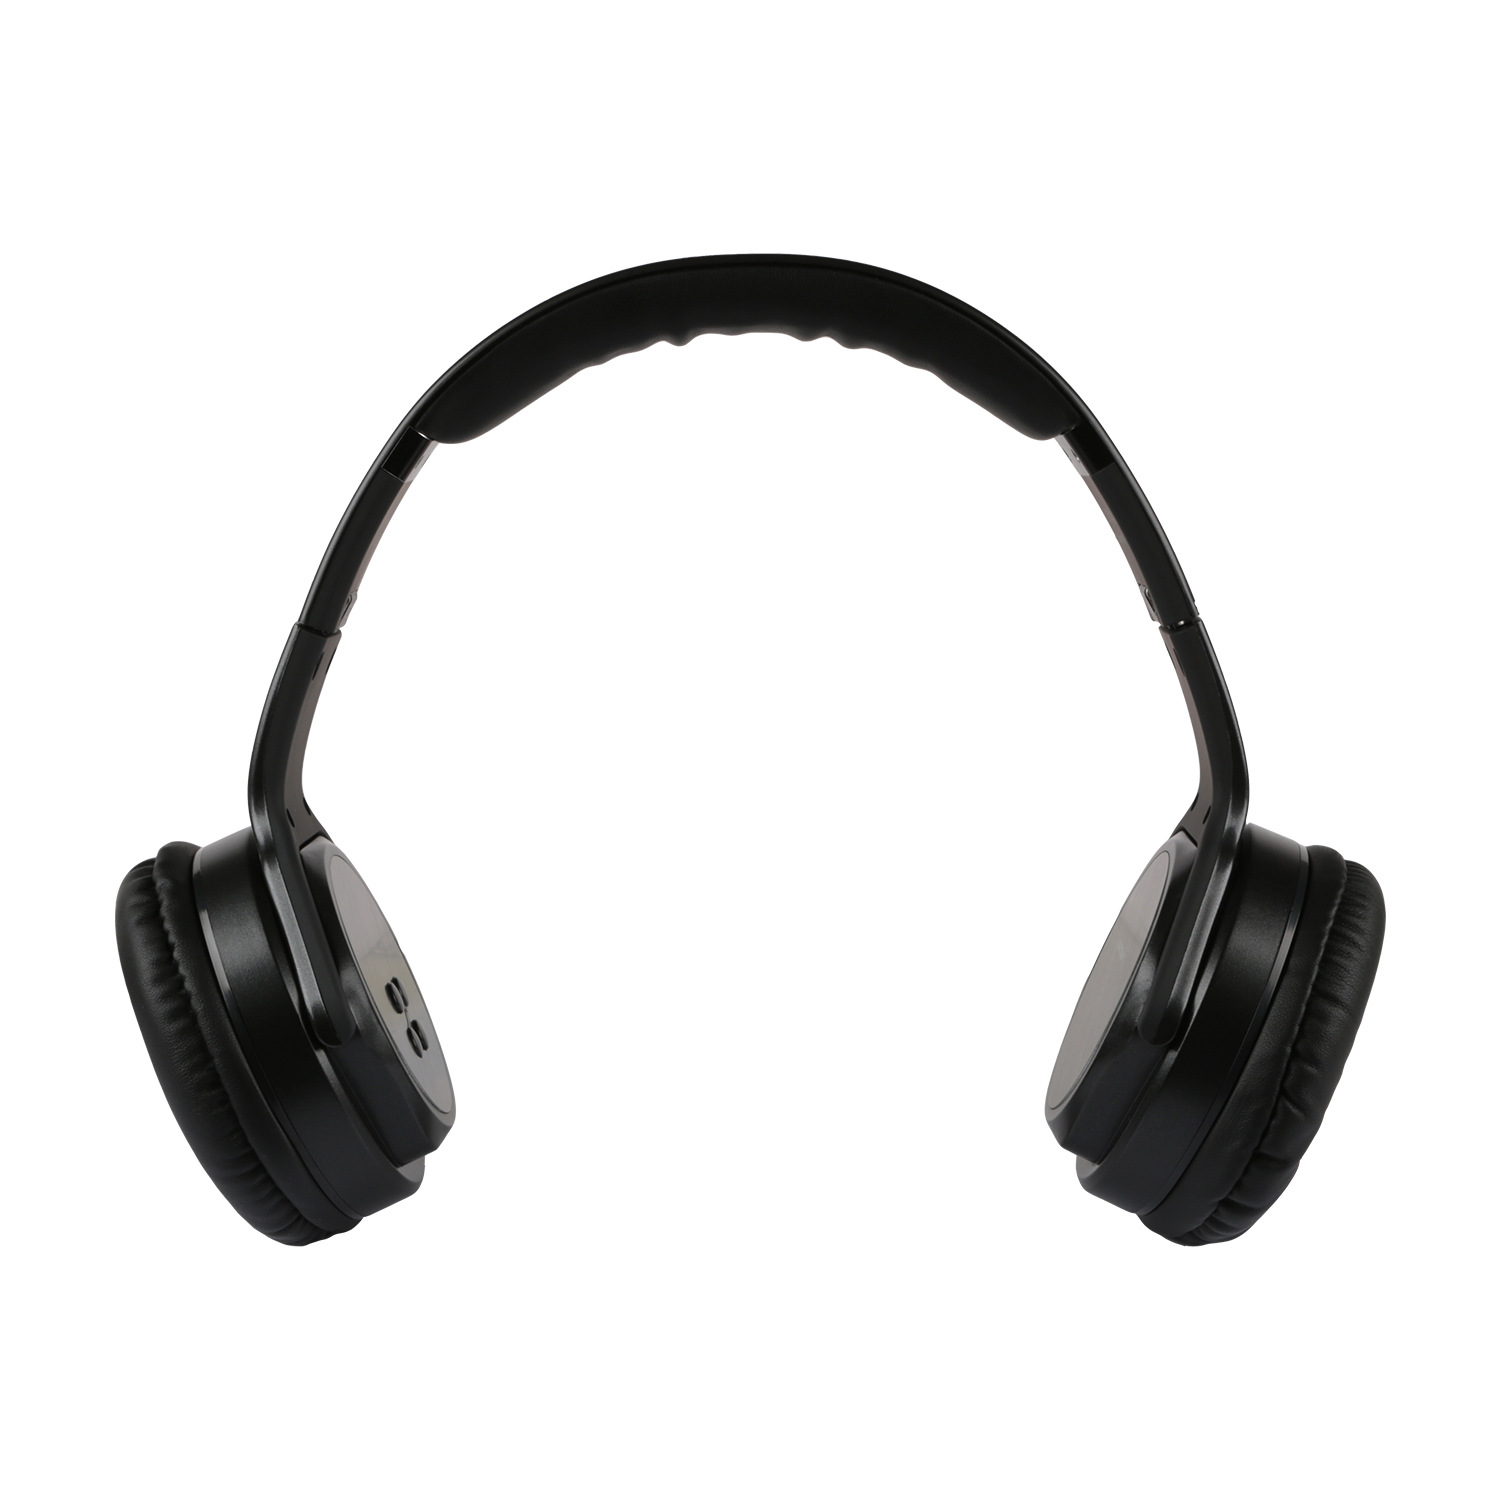 KOCASO HP-530 [Wireless / Foldable] Headphones With Built-in Speaker Mode - image 3 of 9